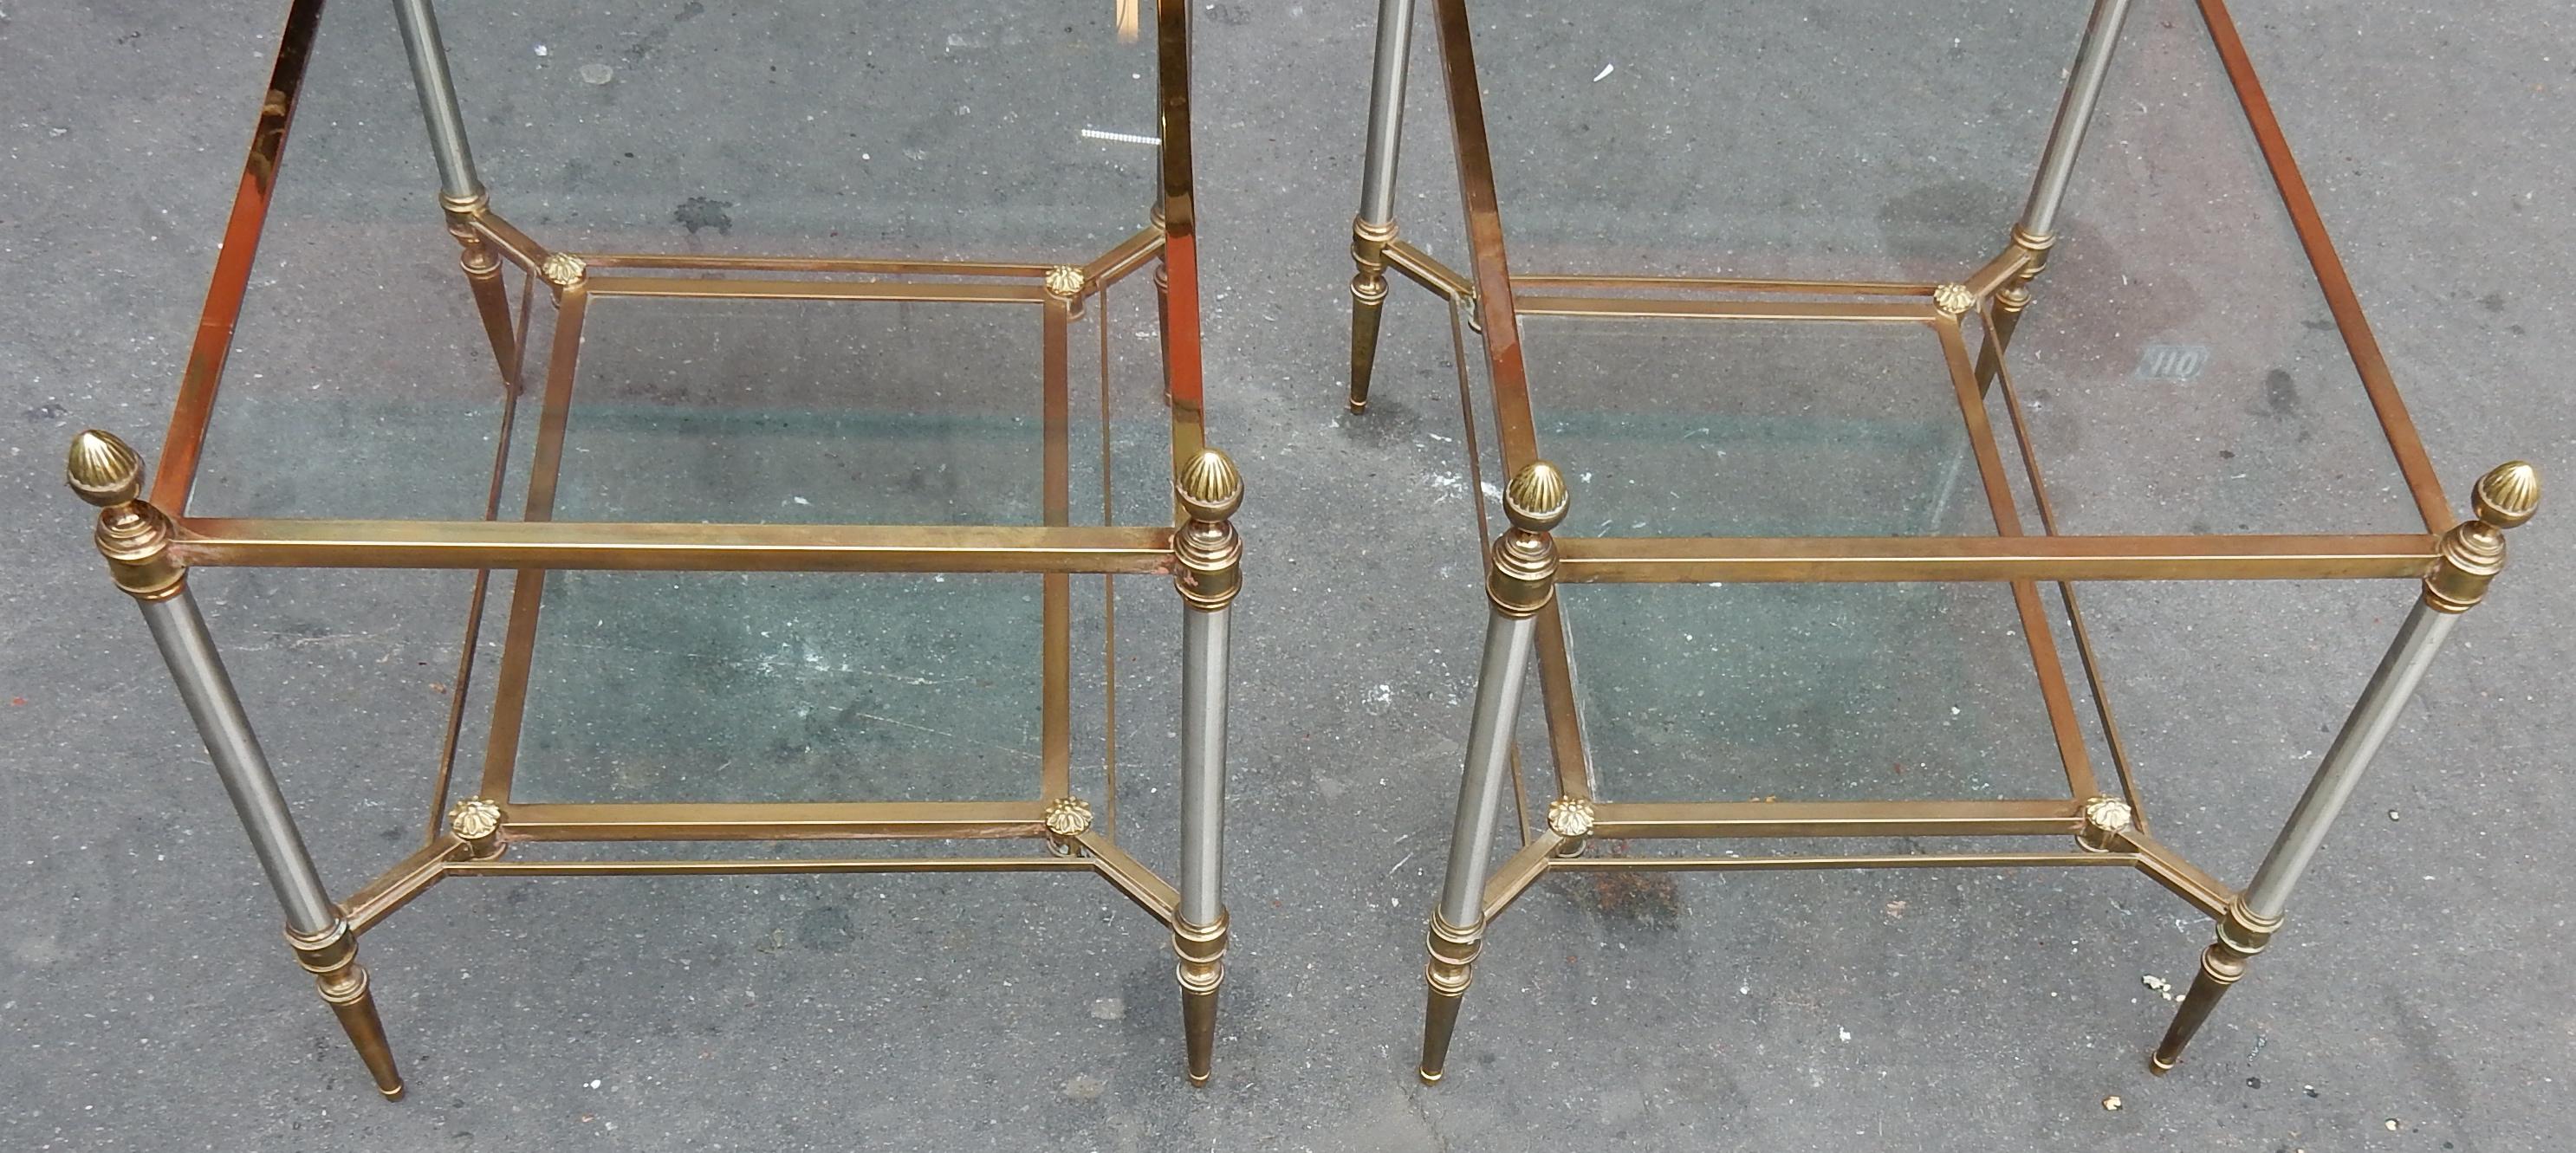 Pair of coffee table with shelf in glass, top in glass, amounts ended with acorns and barrels with cases iron skates typical rifle barrel of this mark
Good condition, circa 1950-1970.